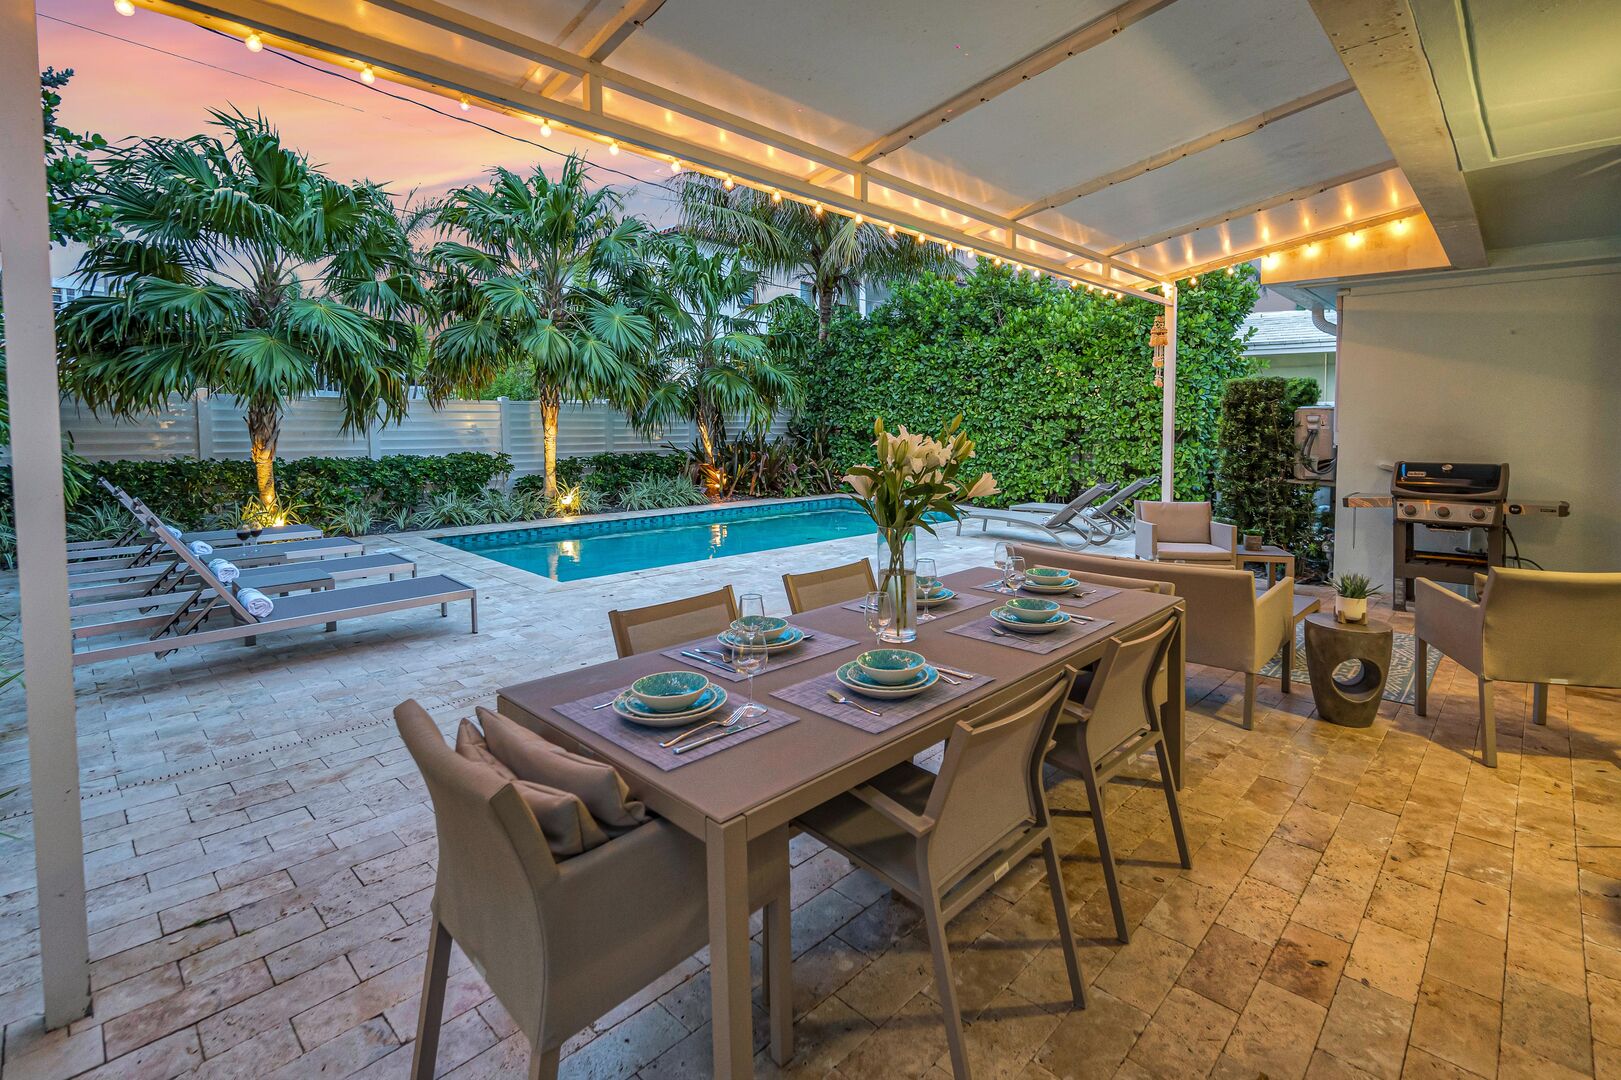 Indulge in the perfect al fresco experience, surrounded by the beauty of Florida.